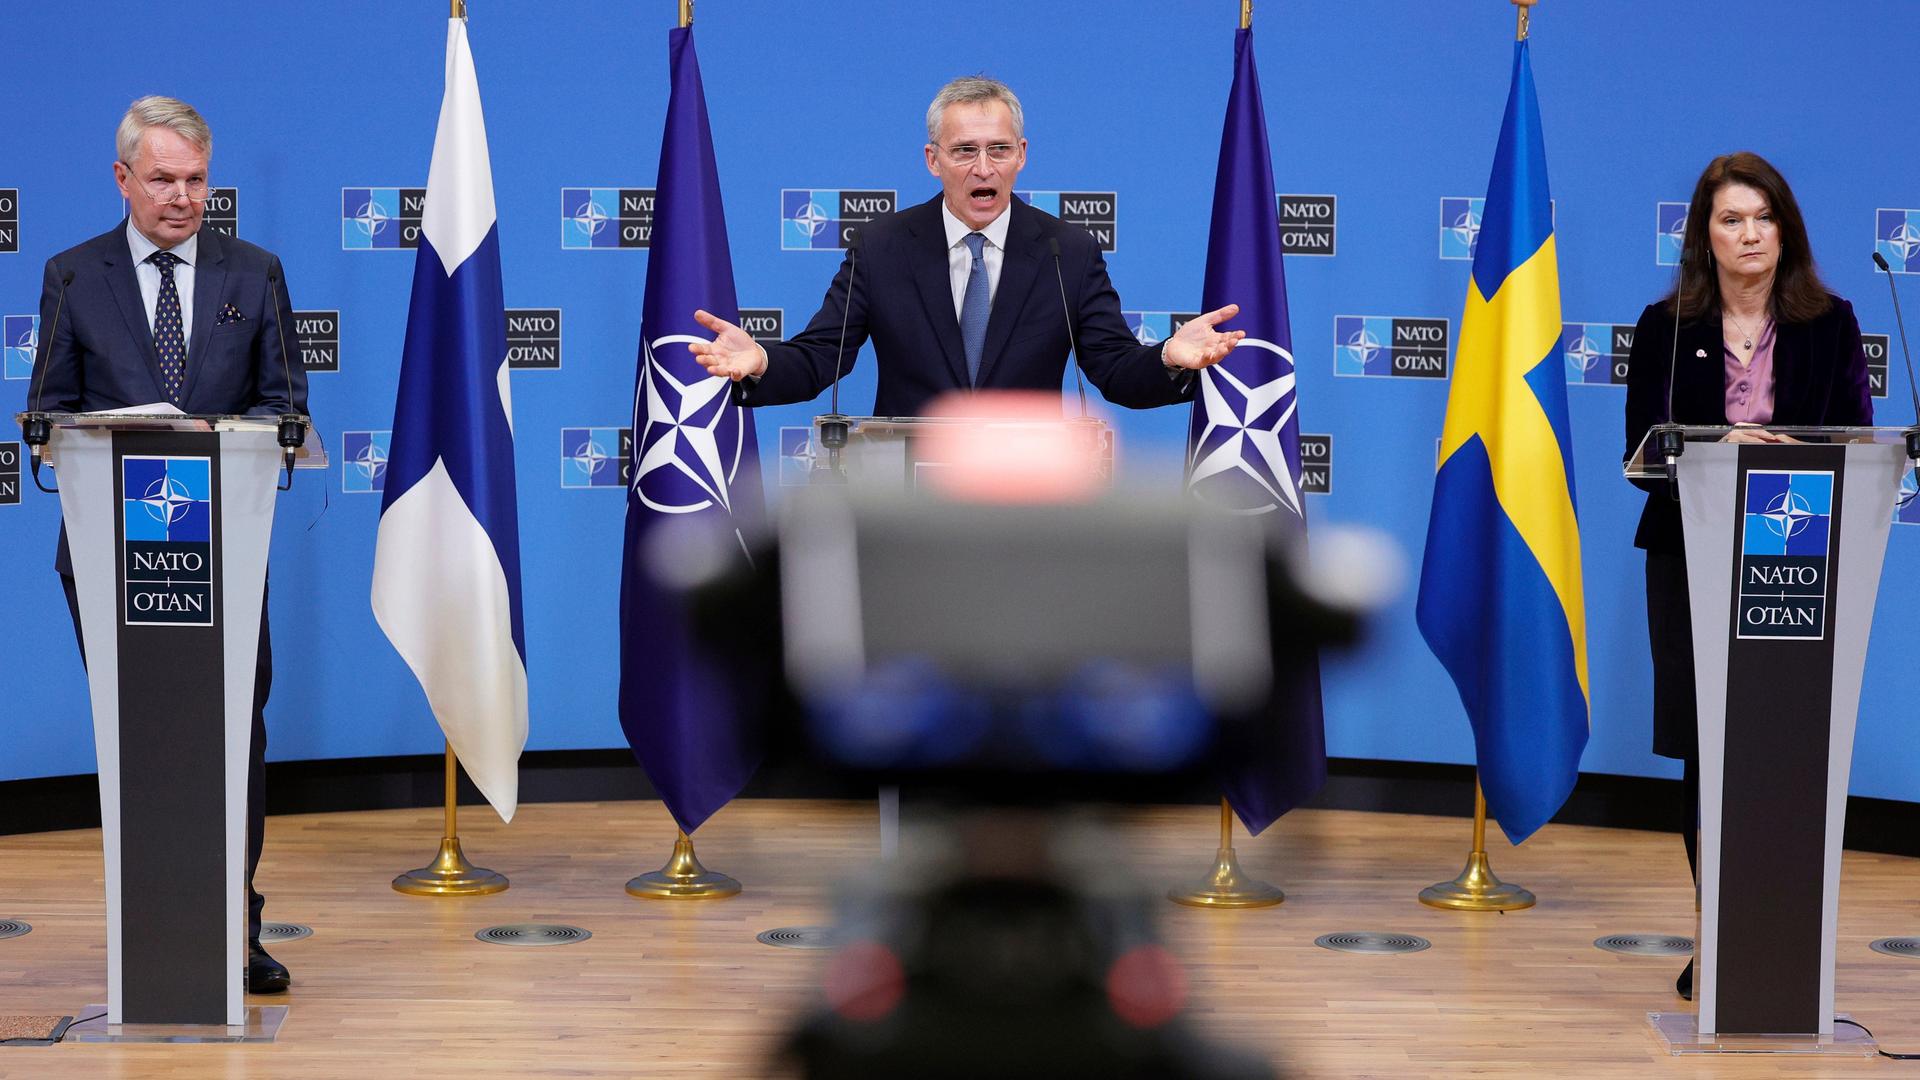 FILE - NATO Secretary General Jens Stoltenberg, center, participates in a media conference with Finland's Foreign Minister Pekka Haavisto, left, and Sweden's Foreign Minister Ann Linde, right, at NATO headquarters in Brussels, Jan. 24, 2022. Security concerns over Russiaâs ongoing invasion of Ukraine changed the calculus for Finland and Sweden which have long espoused neutrality and caused other traditionally âneutralâ countries to re-think what that term really means for them. (AP Photo/Olivier Matthys, File)